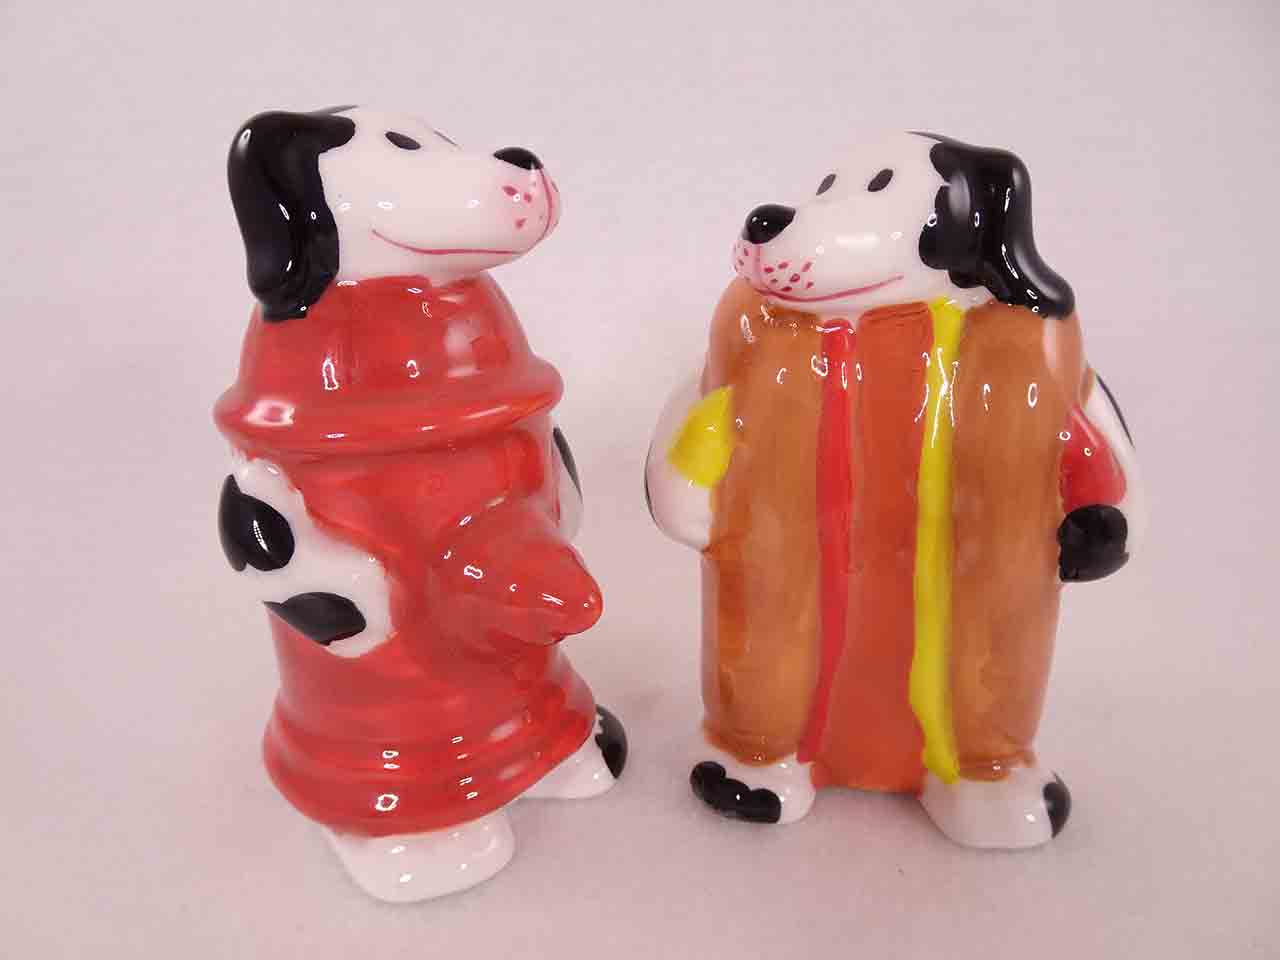 Clay Art Animals in Costumes salt and pepper shakers - dogs dressed up as hotdog and fire hydrant